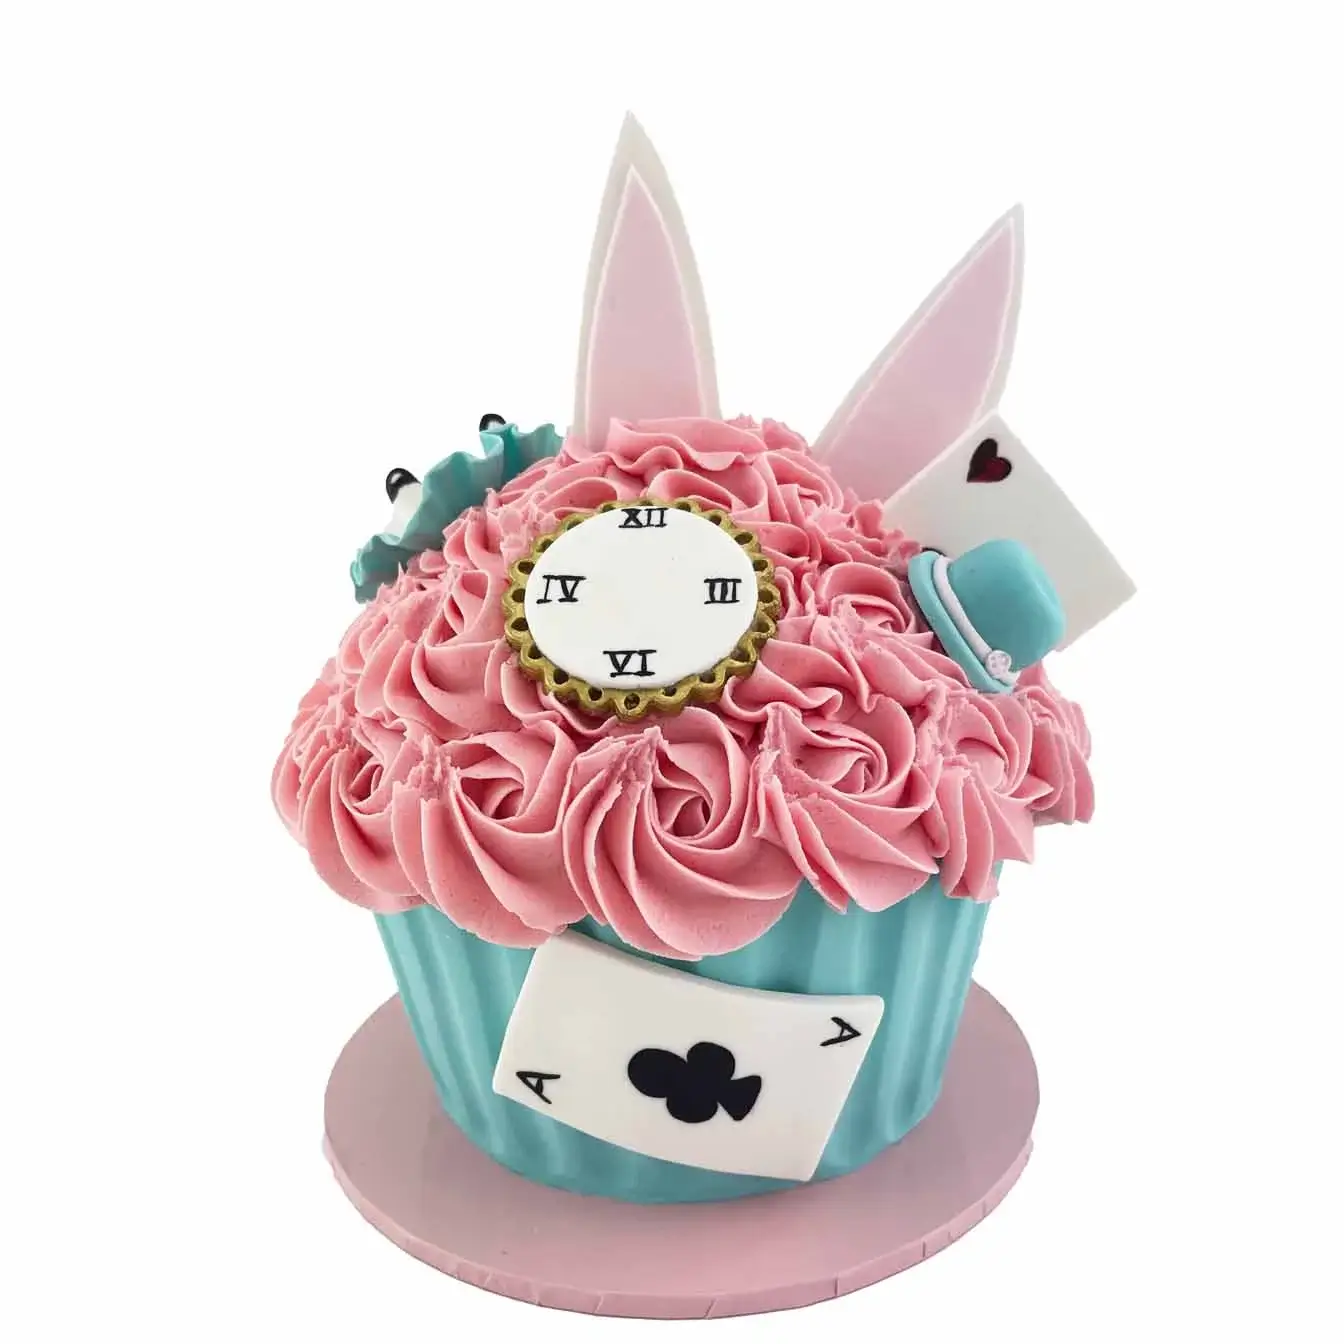 Whimsical Alice in Wonderland Giant Cupcake; A Colourful Dessert with Fondant Accents and Creative Details.